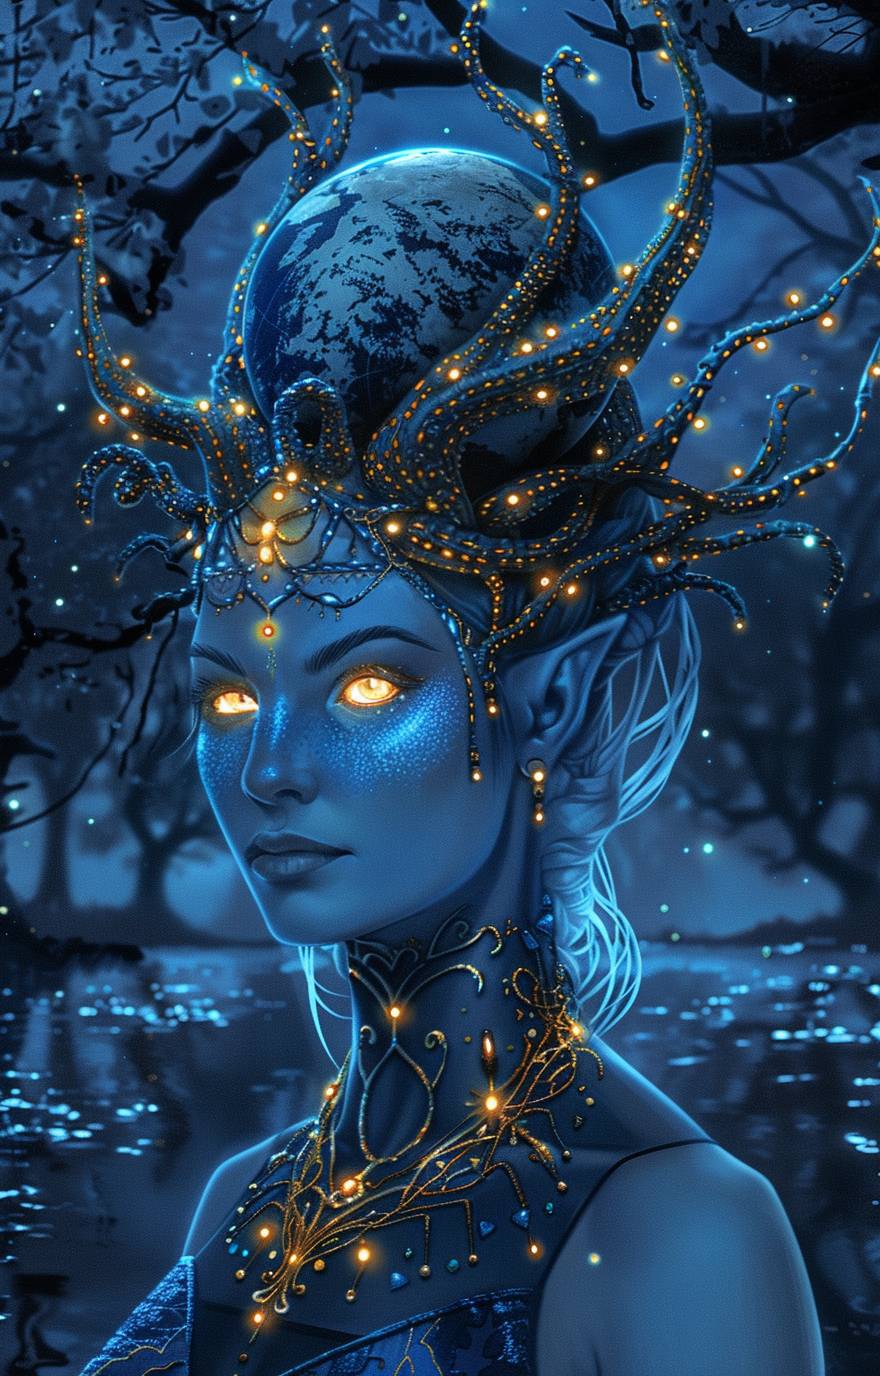 A beautiful blue woman with an elegant, slender figure and glowing eyes stands in front of the Earth. She has many metallic vines growing from behind her ears to form two metal horns that stand upright above each ear. The background is a dark night sky with trees and stars. Her chest skin glows a golden yellow like fire under sunlight. Water flows around her, creating ripples. She wears ancient silver jewelry and carries futuristic LED lights in a cinematic style.